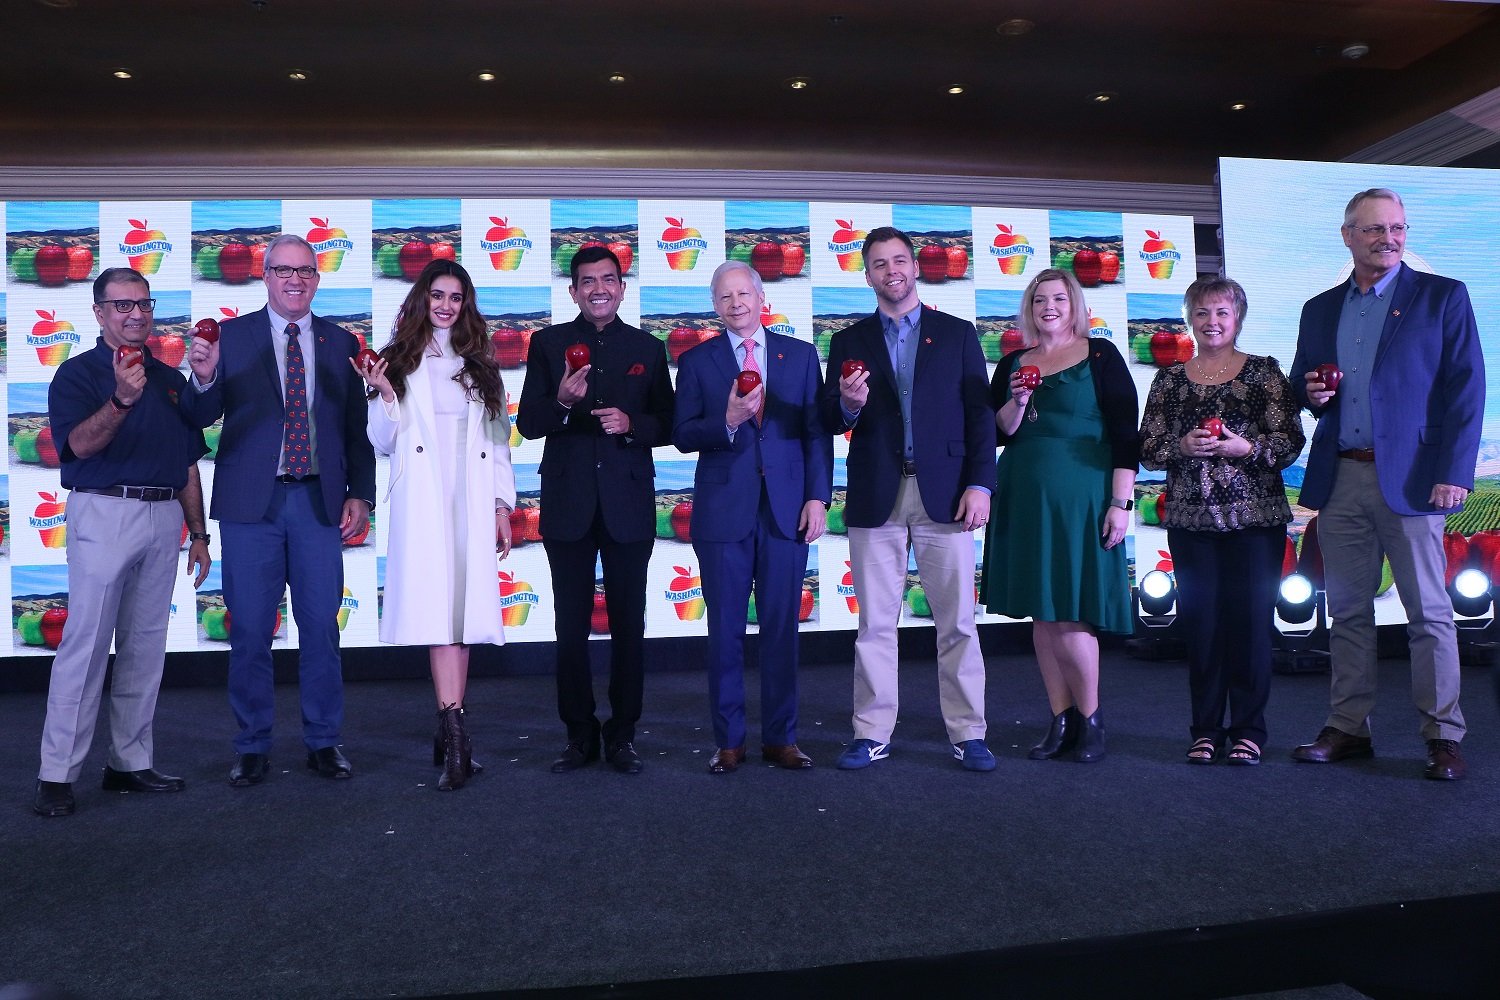 Washington Apples launches new campaign in India